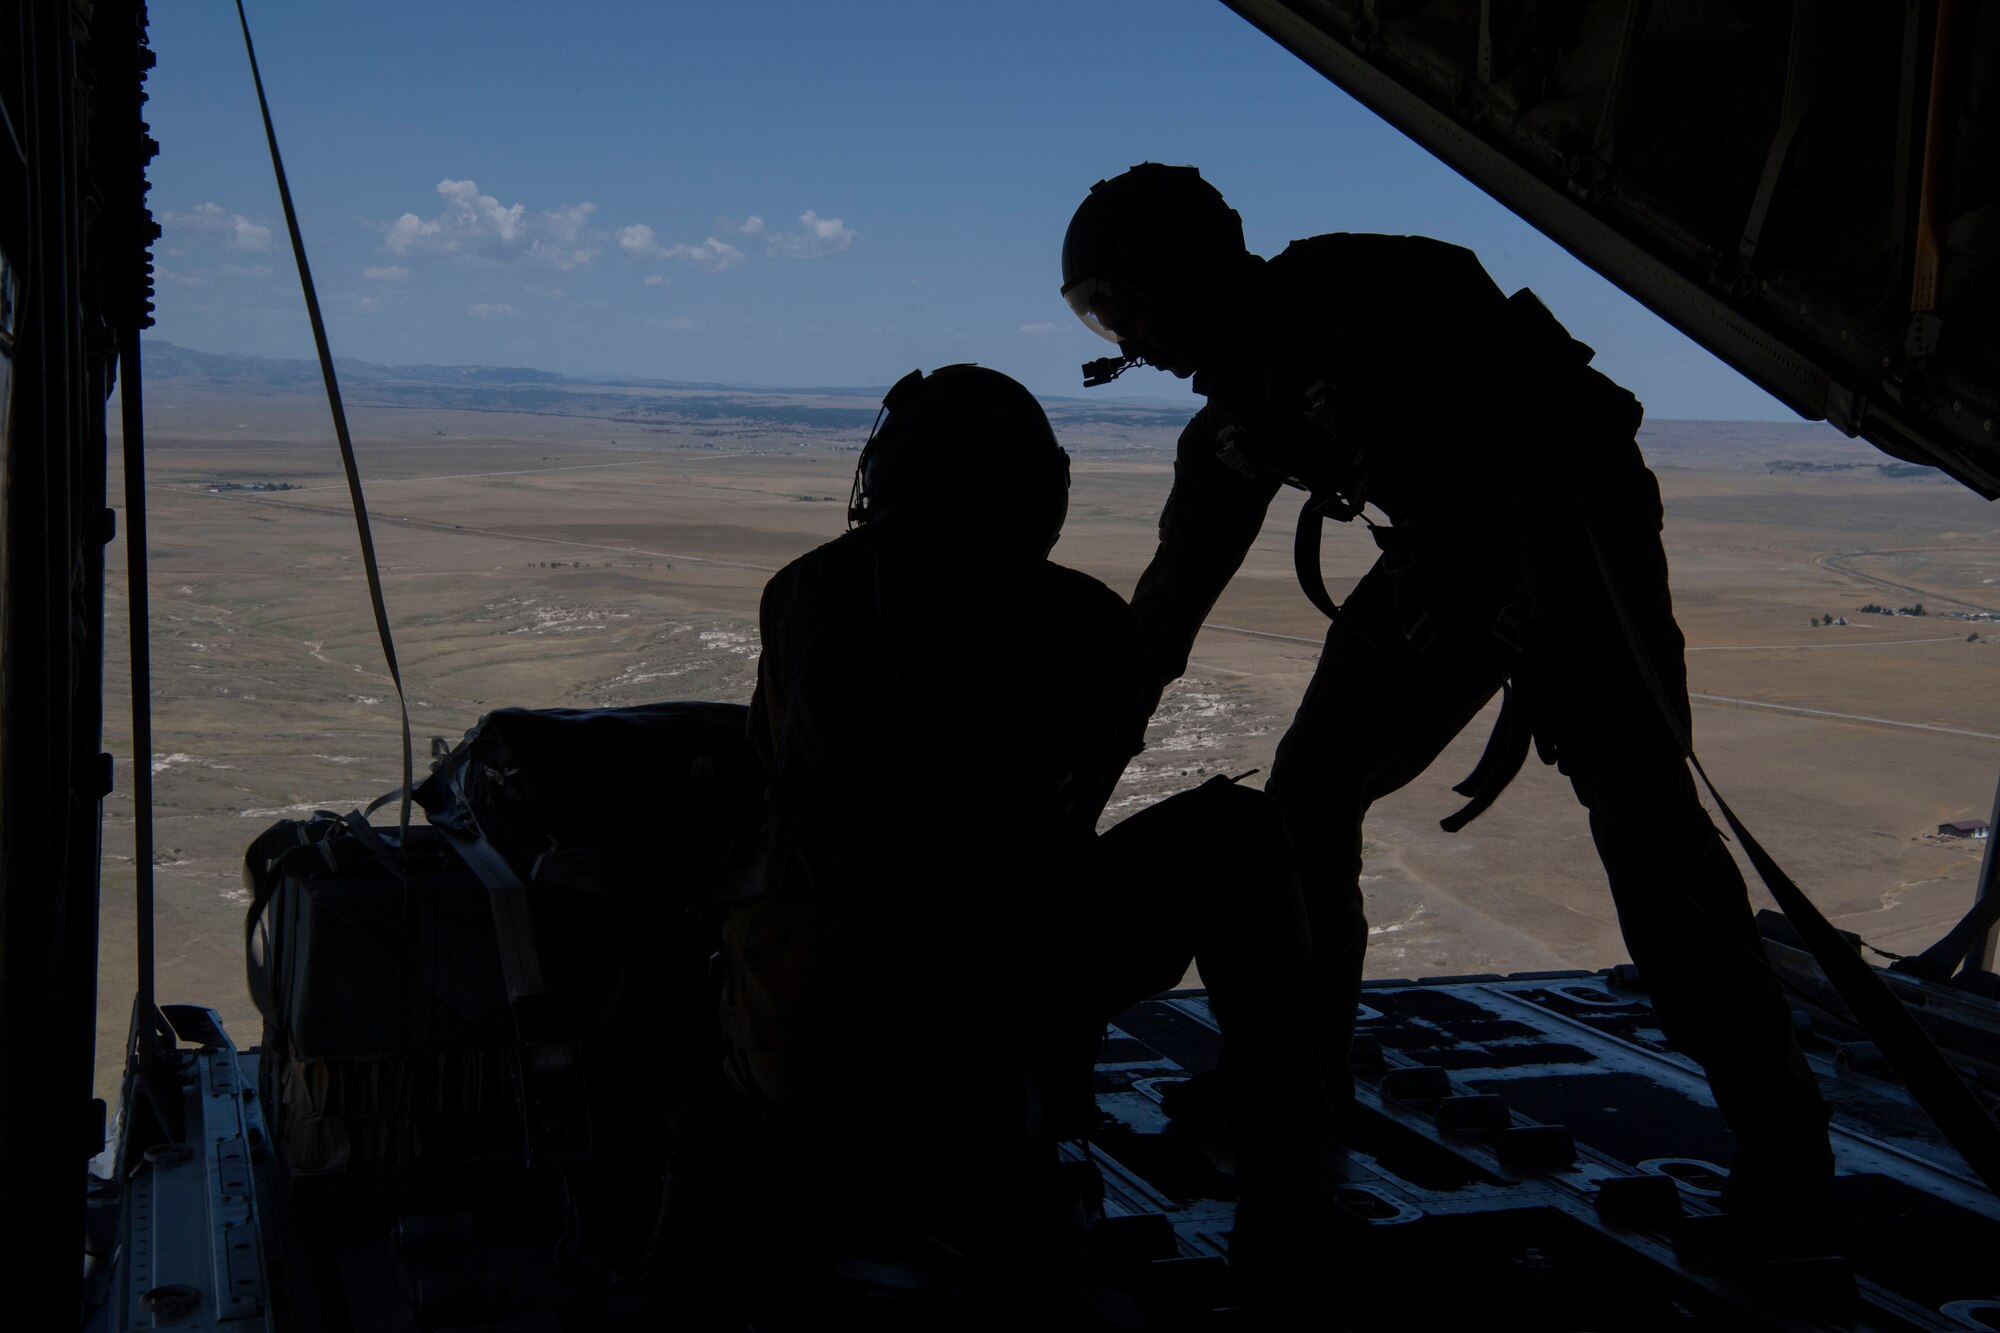 Airman 1st Class Cameron Bou (left) and Senior Airman Kirk Mumau (right), 41st Airlift Squadron loadmasters, conduct an airdrop over Reed Drop Zone in Colorado July 27, 2020. This training is part of the 4/12 deployment initiative, which was developed in 2019 between airlift squadrons from Dyess Air Force Base, Texas and Little Rock AFB, allowing each squadron a full year of dwell time followed by a four-month rotation to their respective area of responsibility. (U.S. Air Force photo by Airman 1st Class Aaron Irvin)